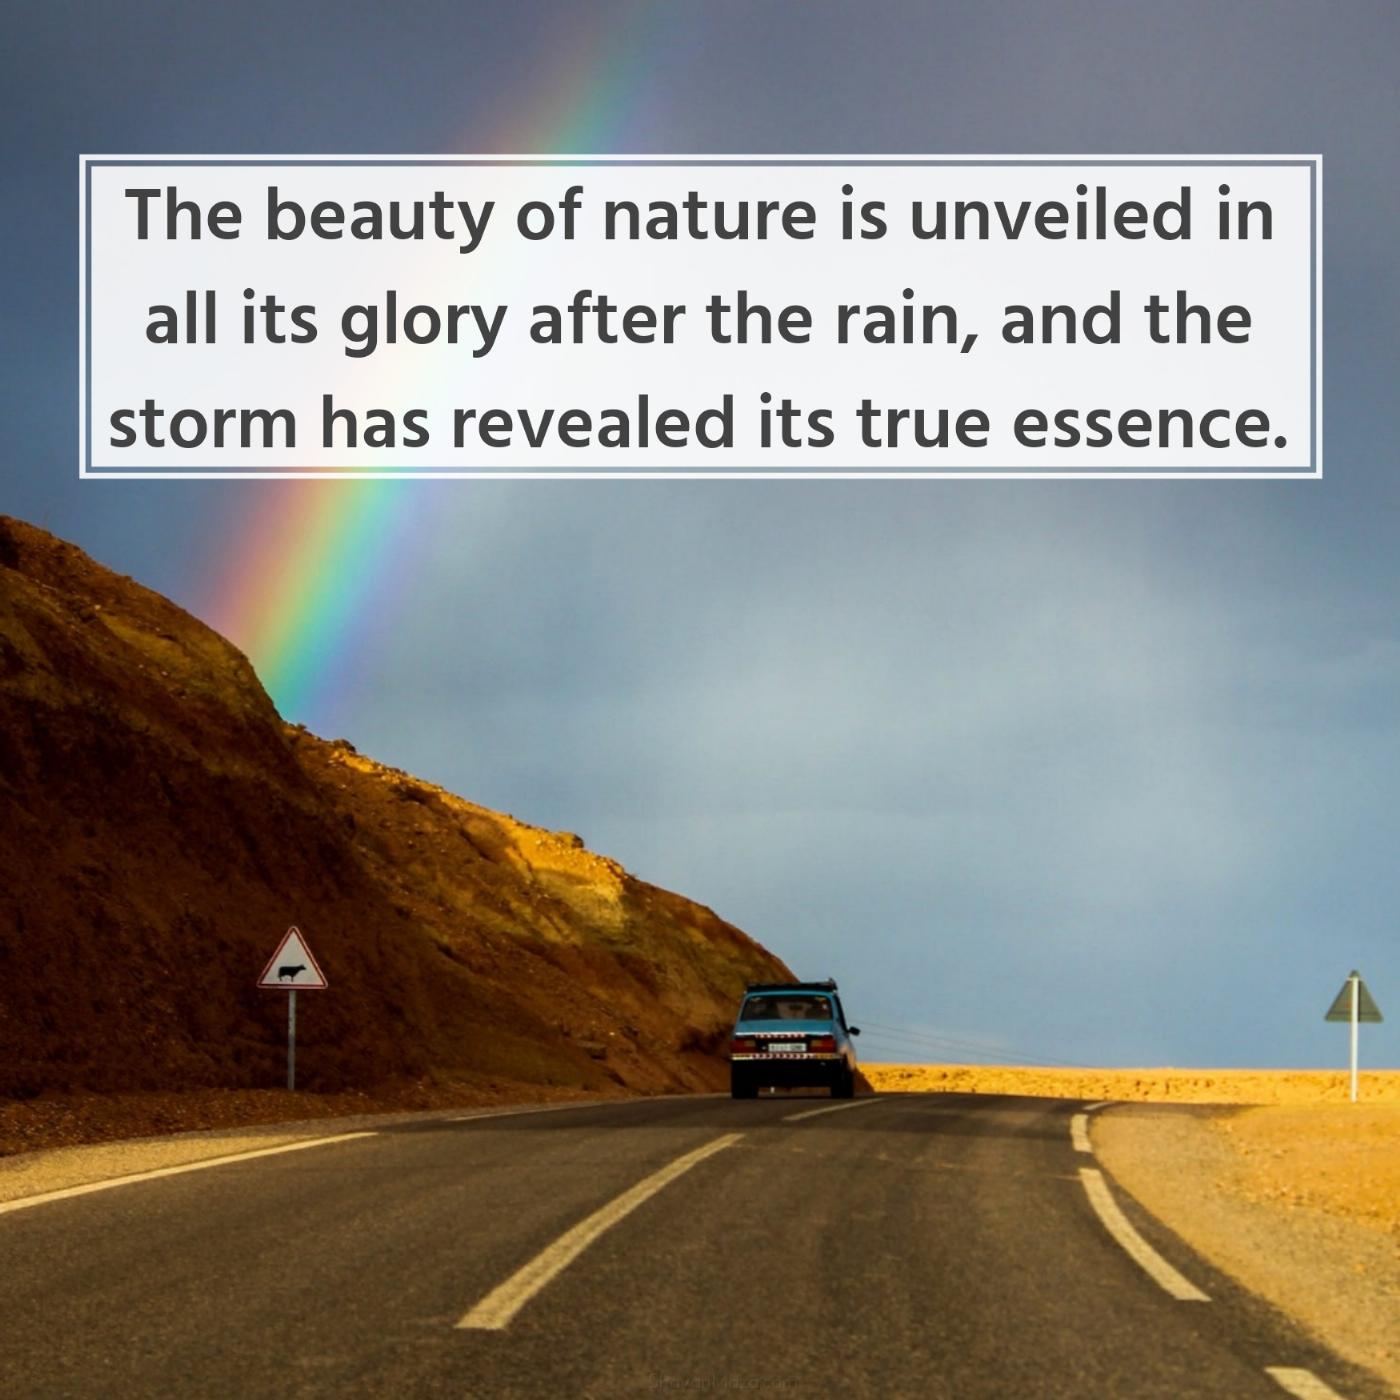 The beauty of nature is unveiled in all its glory after the rain